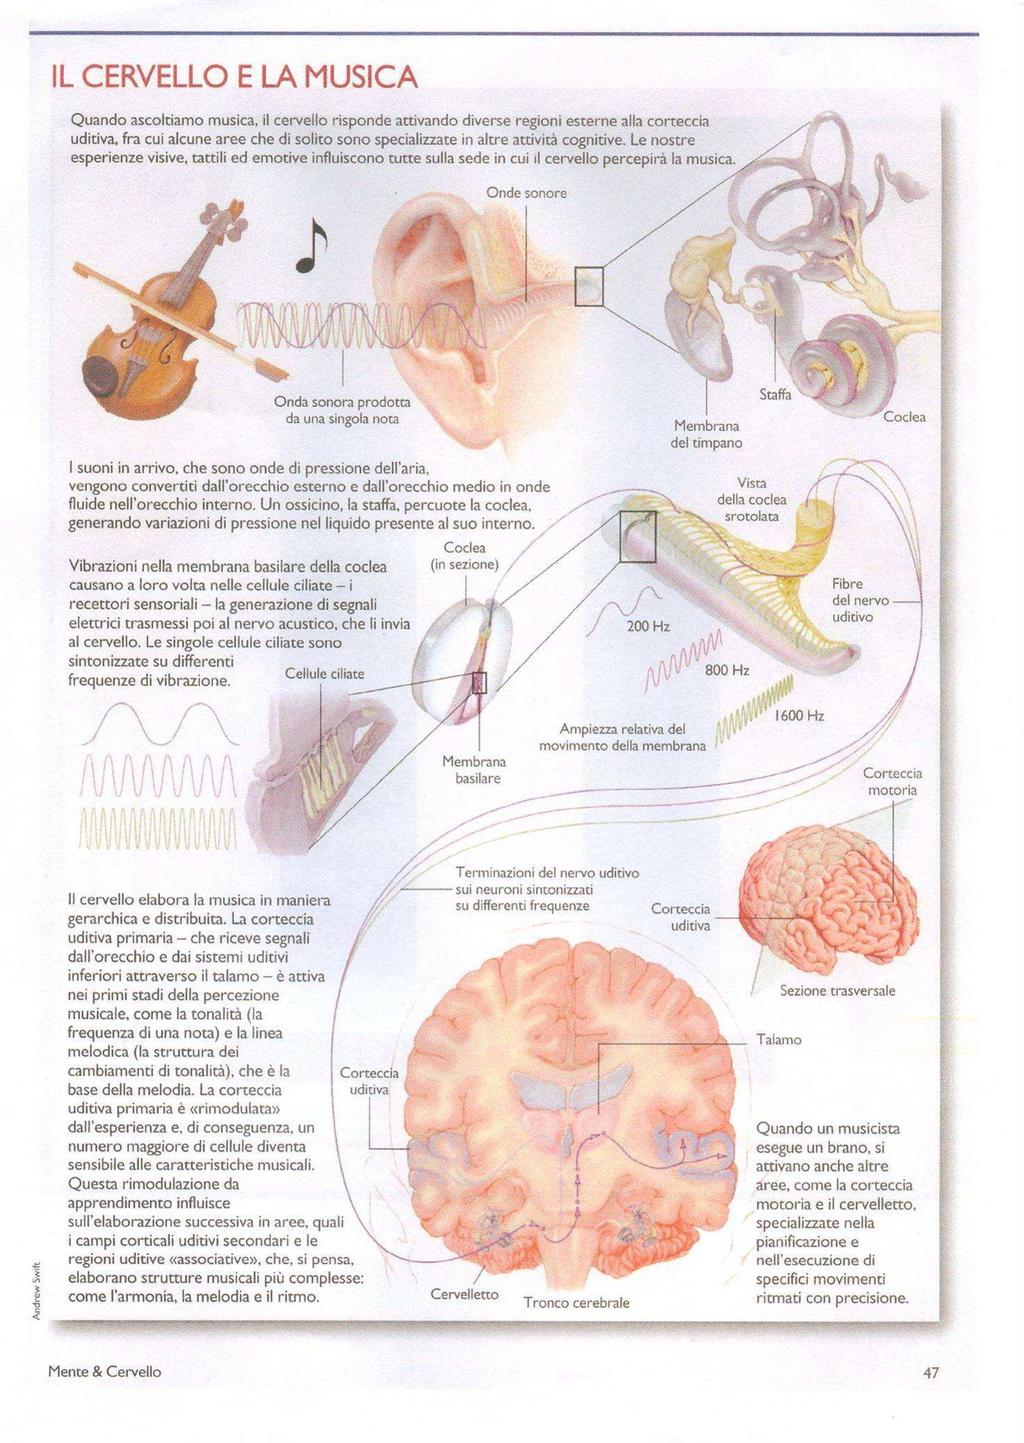 The brain elaborates music in a hierarchical and distributed way.